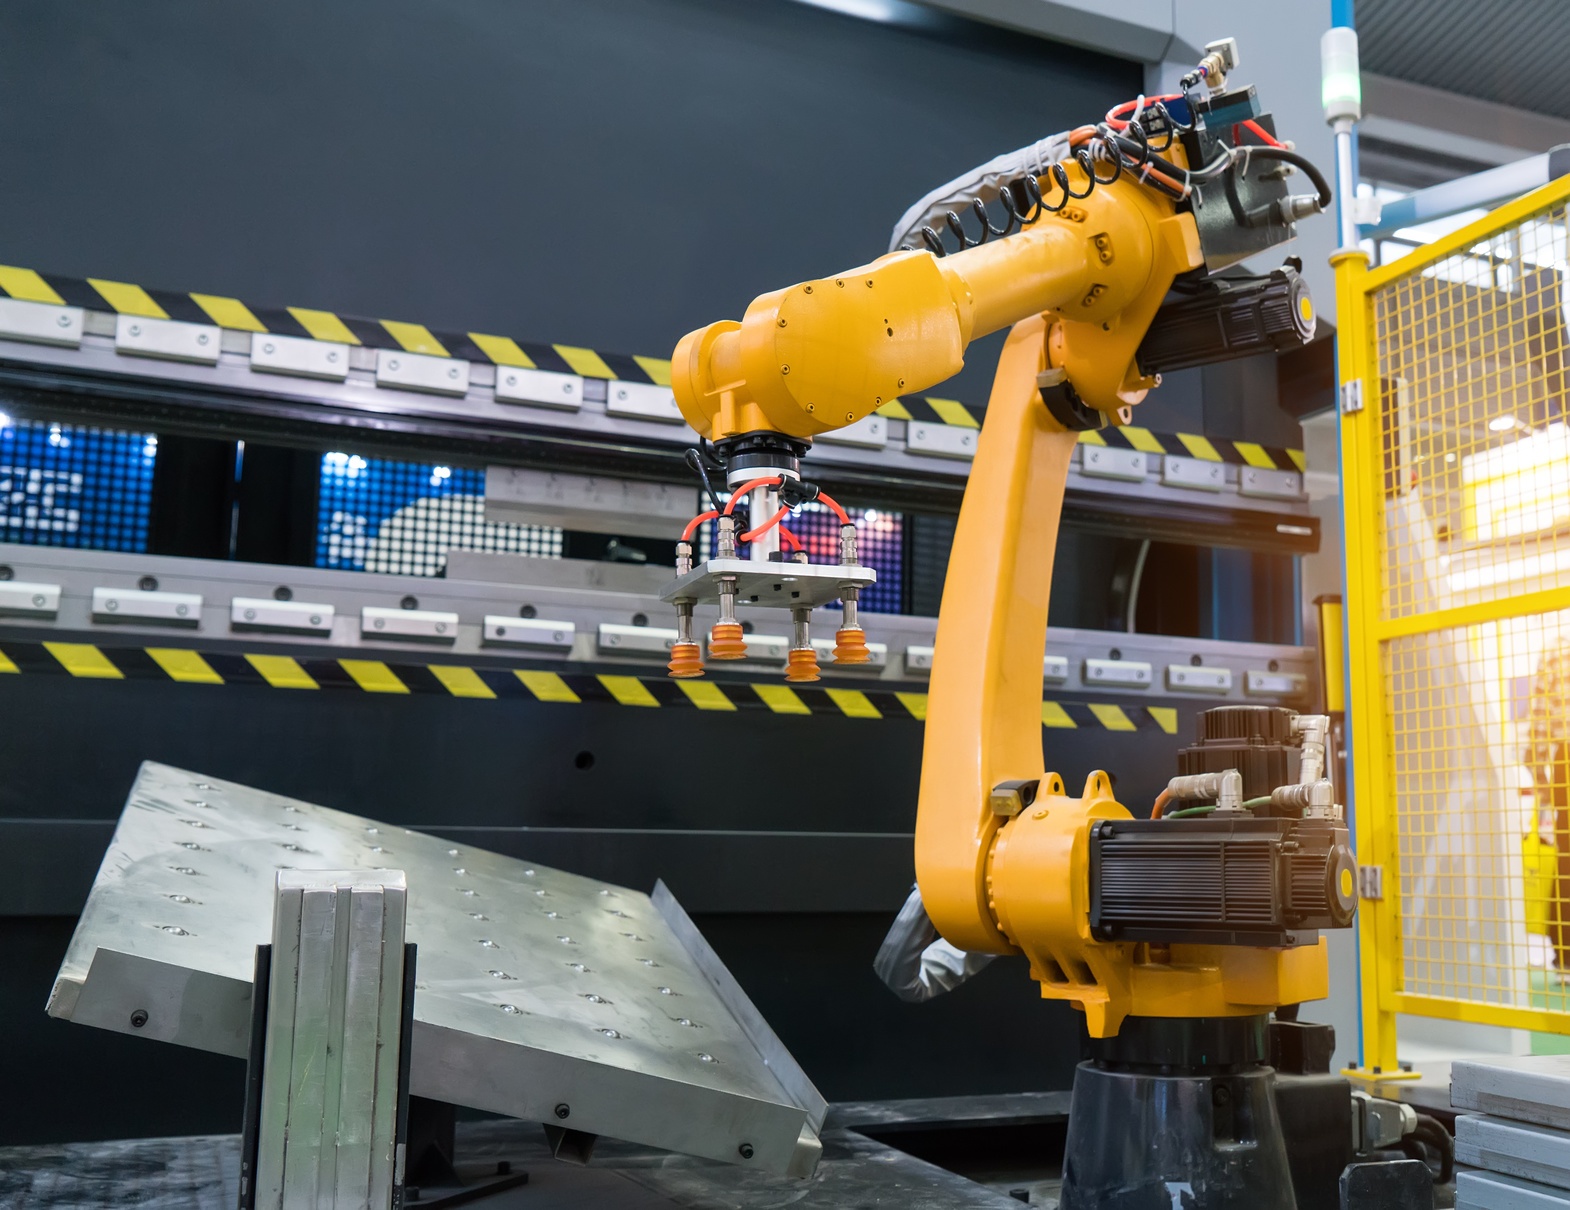 An Overview of Robotics in Manufacturing [Part 1 of 2]